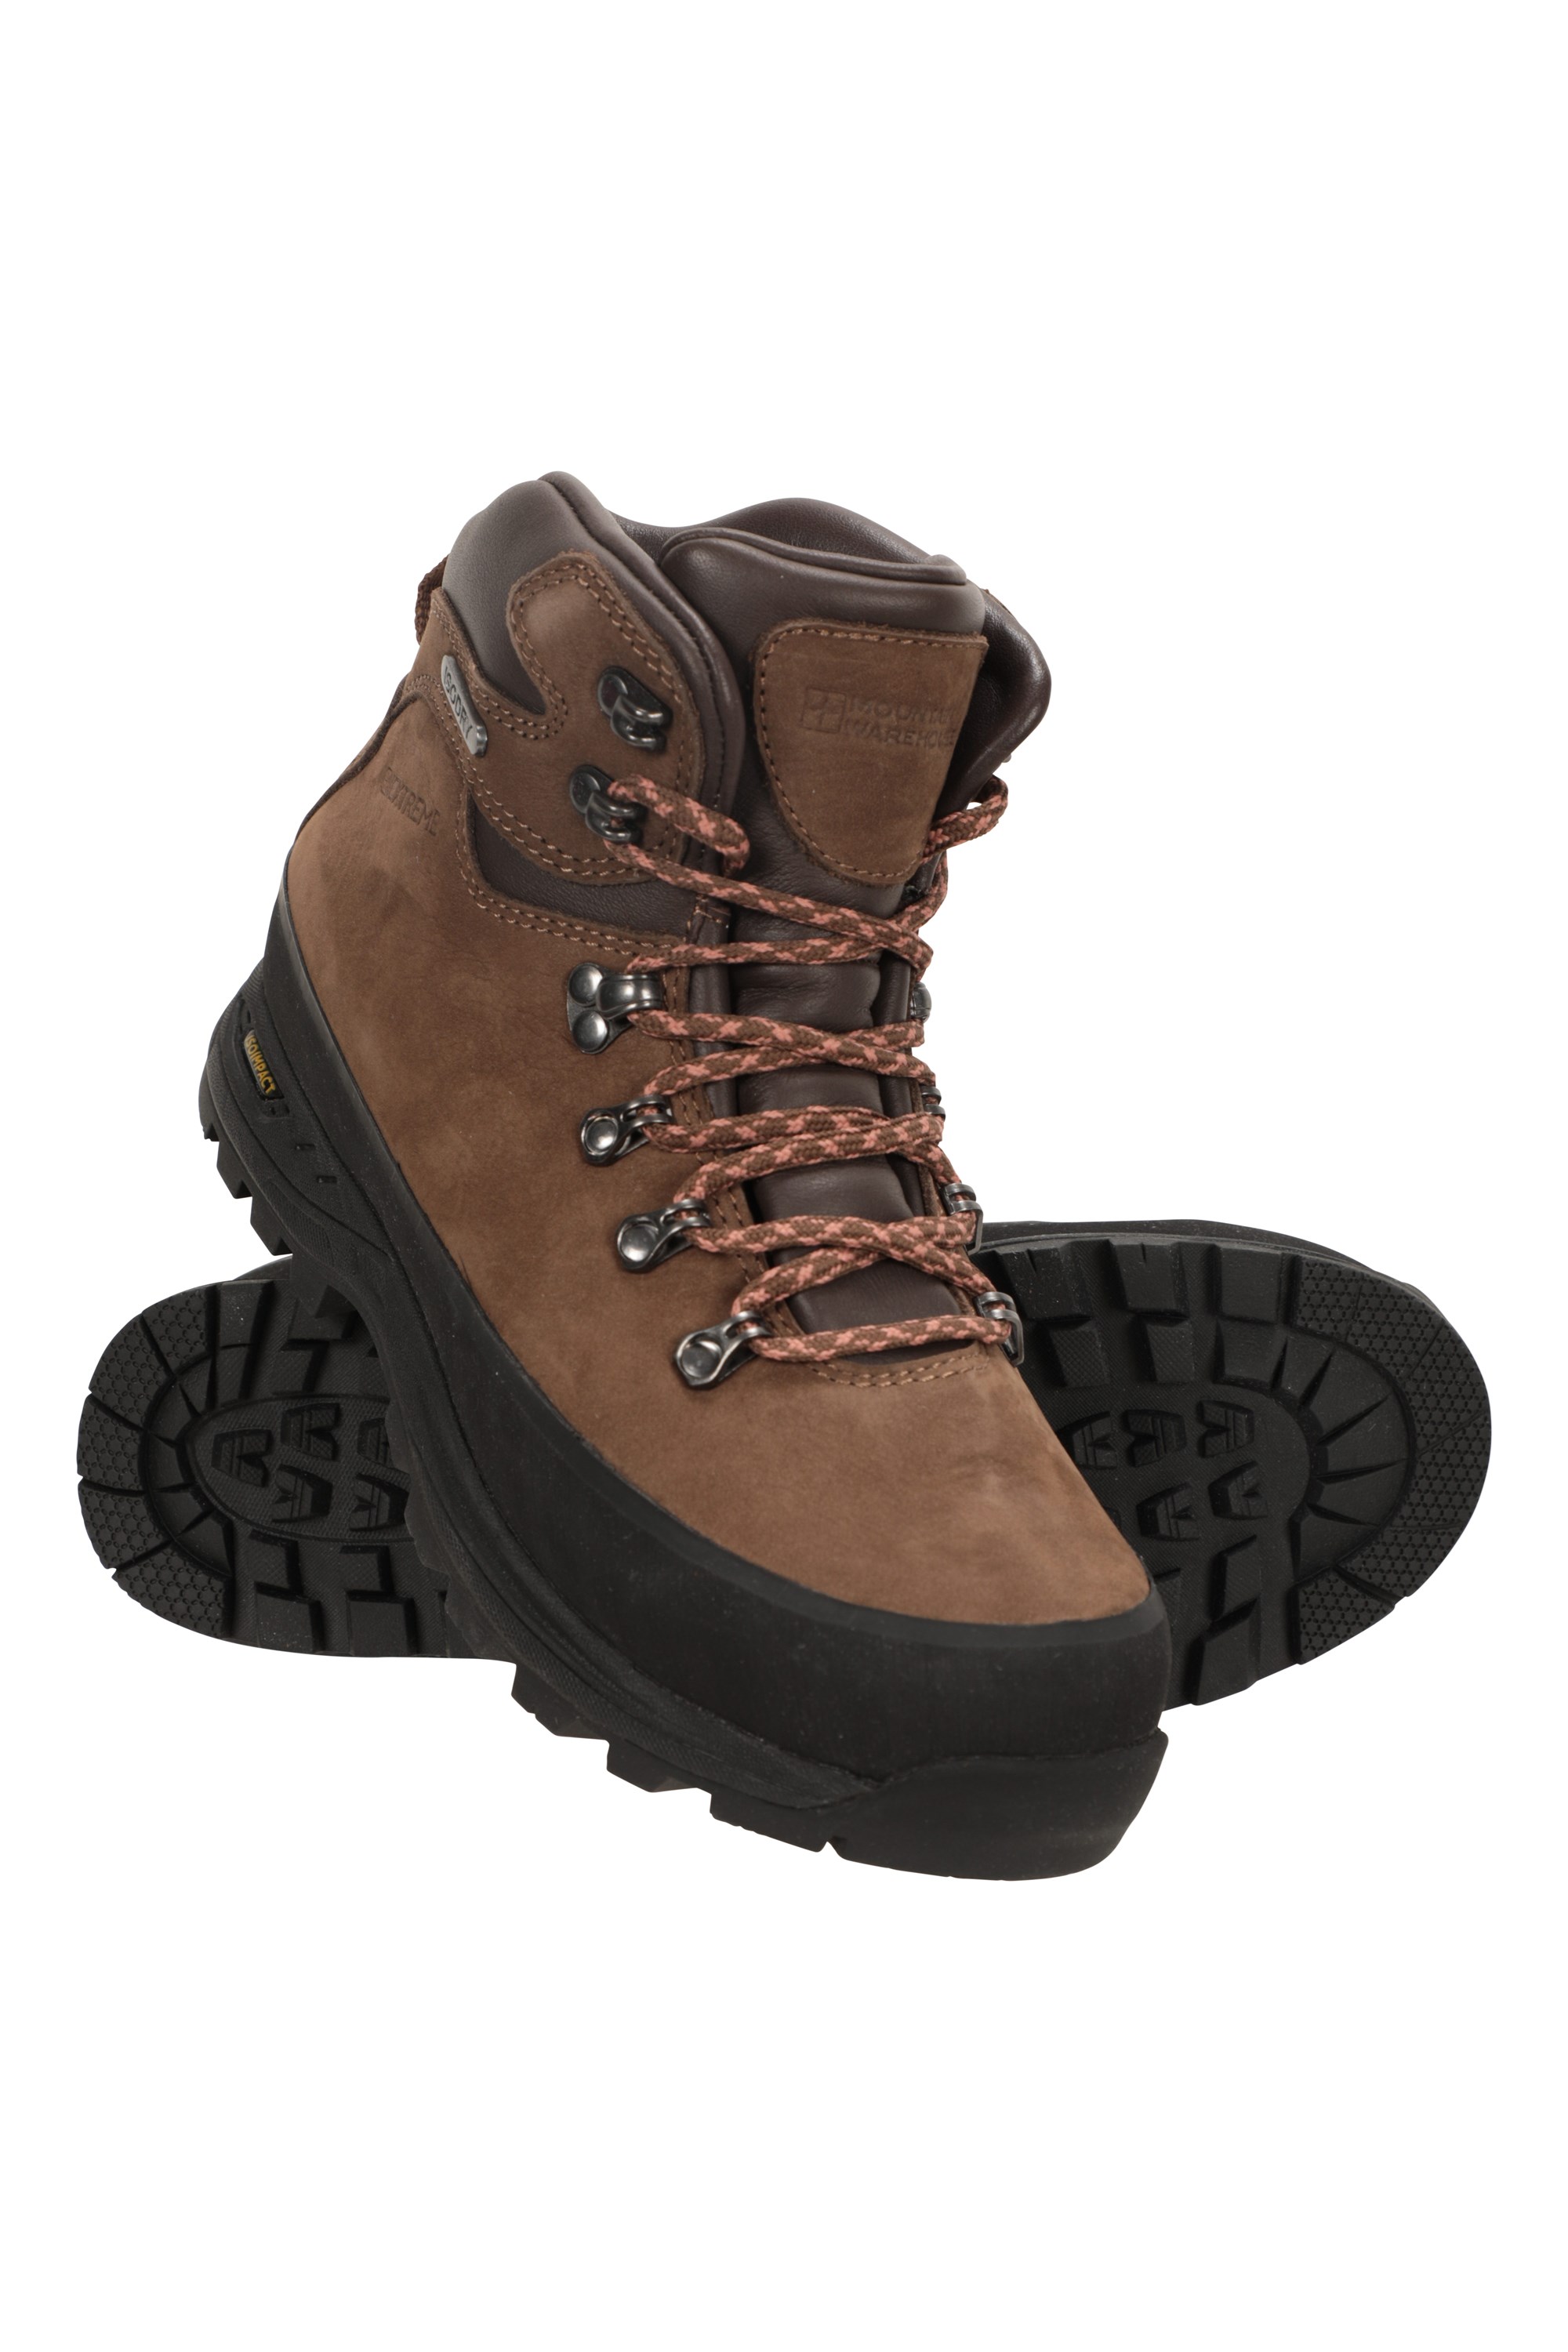 Extreme Quest Womens Waterproof Isogrip Boots - Brown